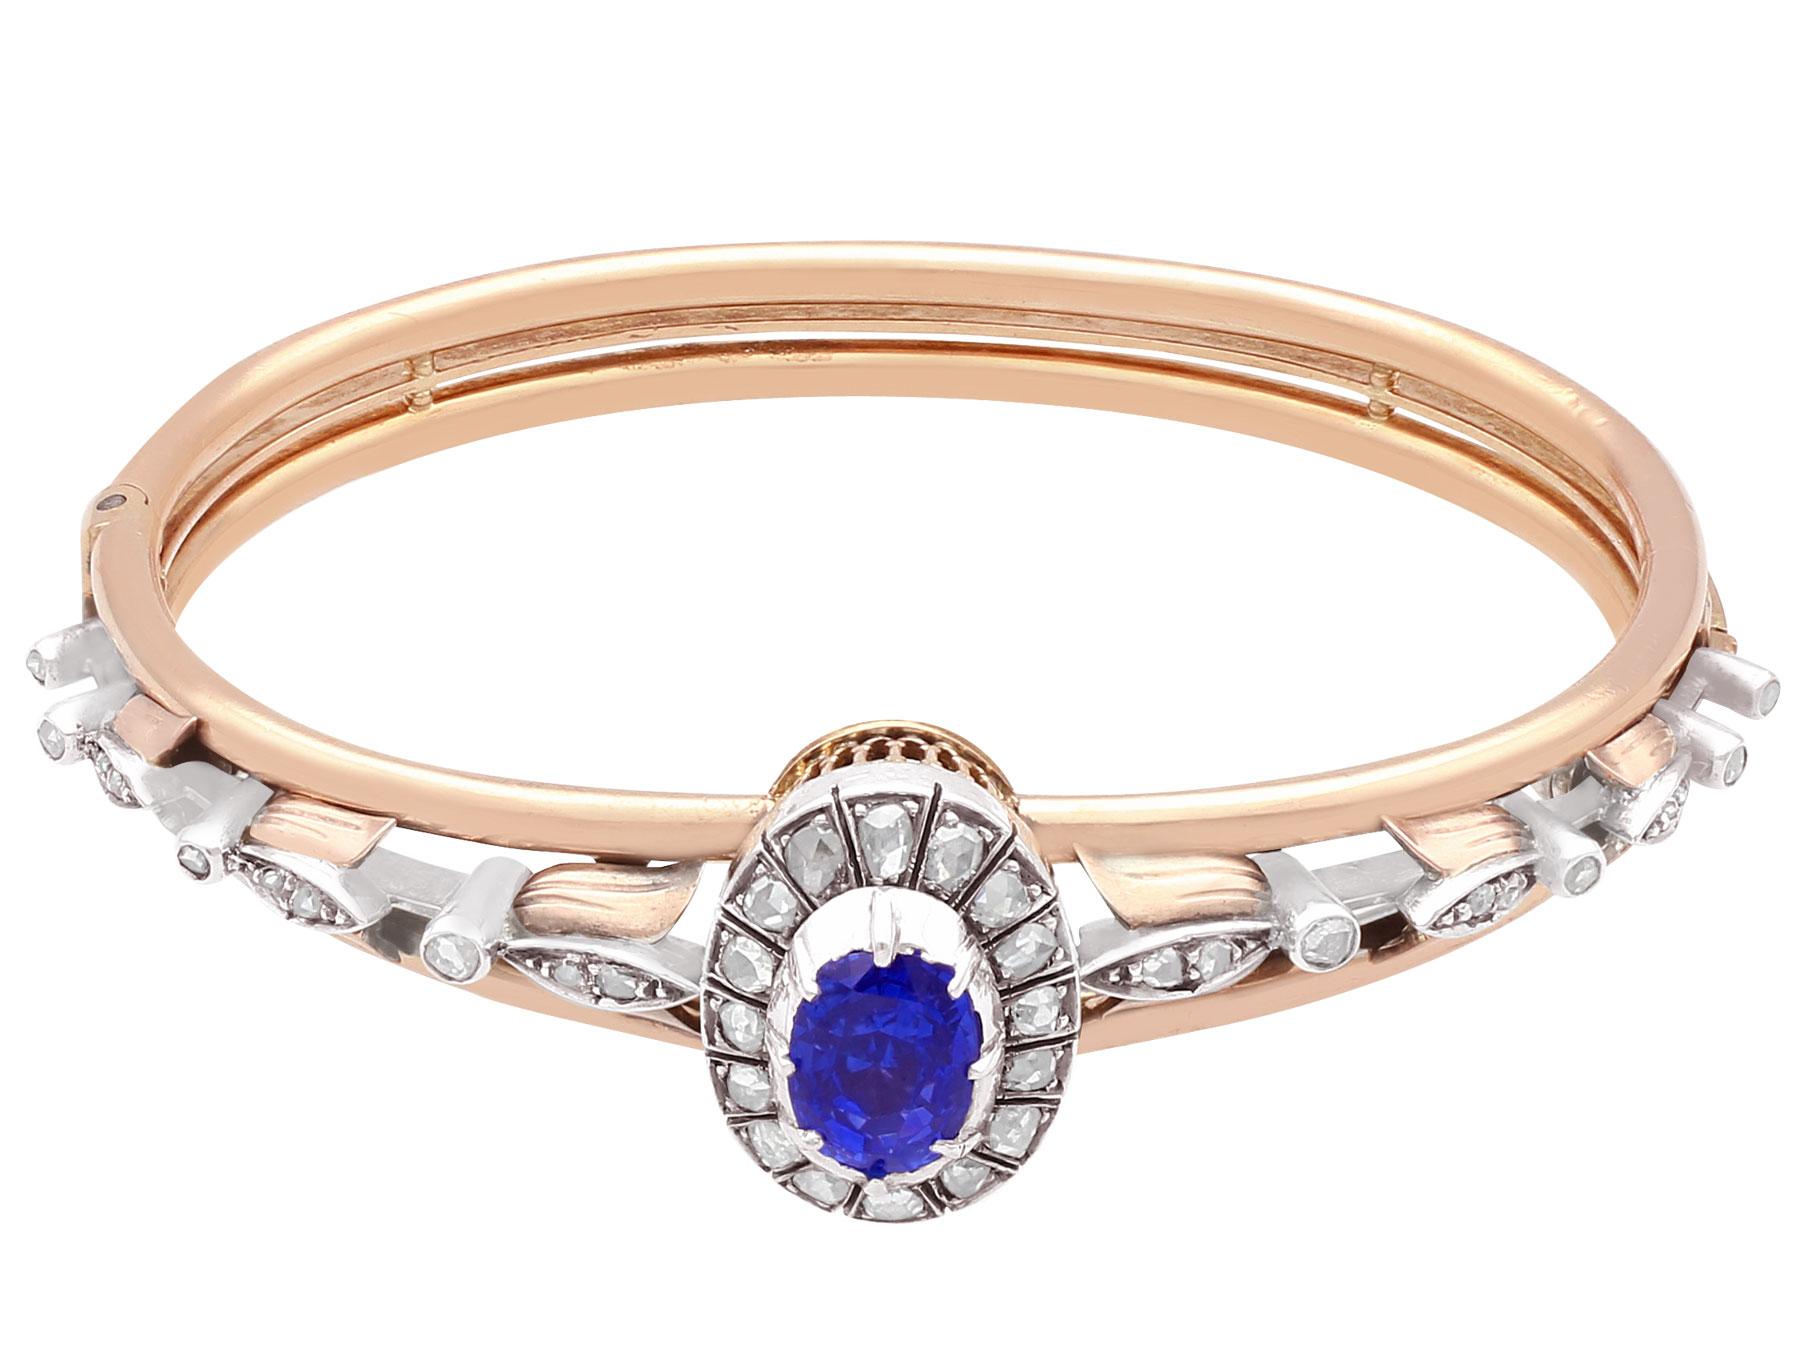 Antique 1880s 2.46 Carat Oval Cut Sapphire & 1.05 Carat Diamond Rose Gold Bangle In Excellent Condition For Sale In Jesmond, Newcastle Upon Tyne